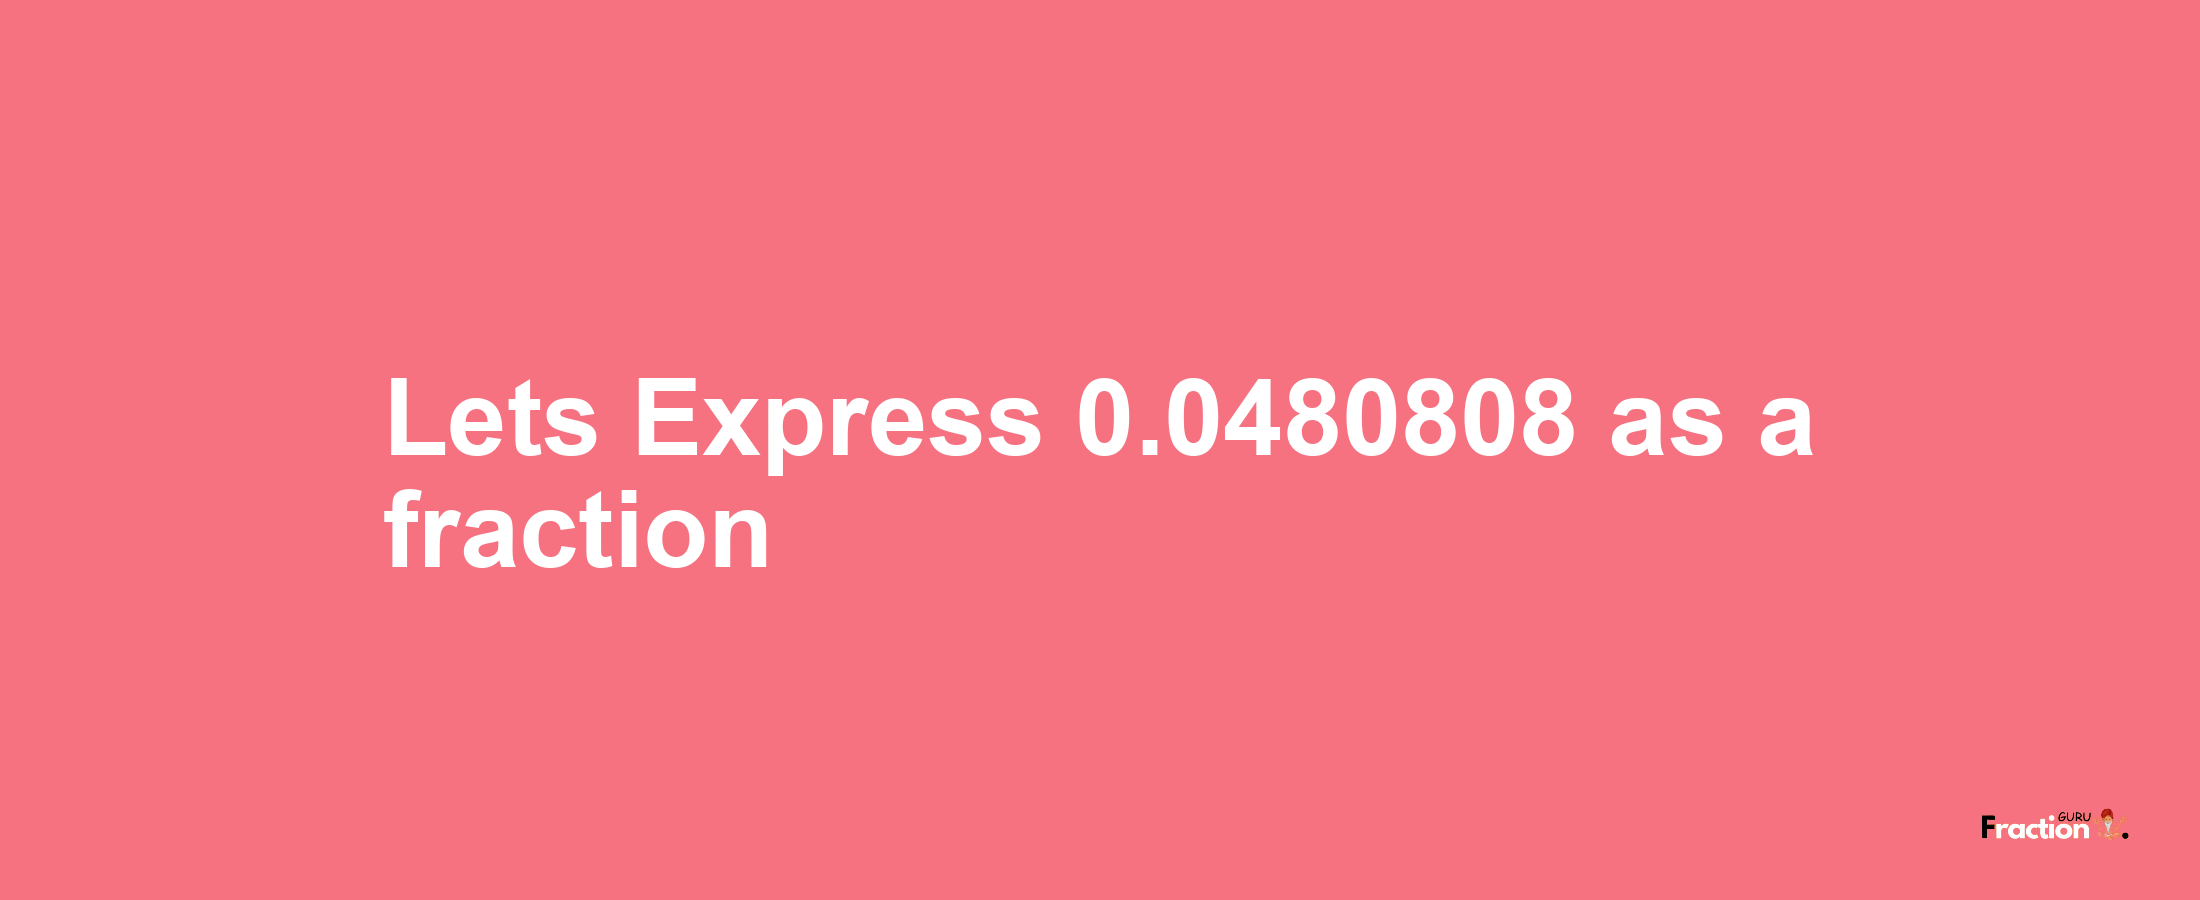 Lets Express 0.0480808 as afraction